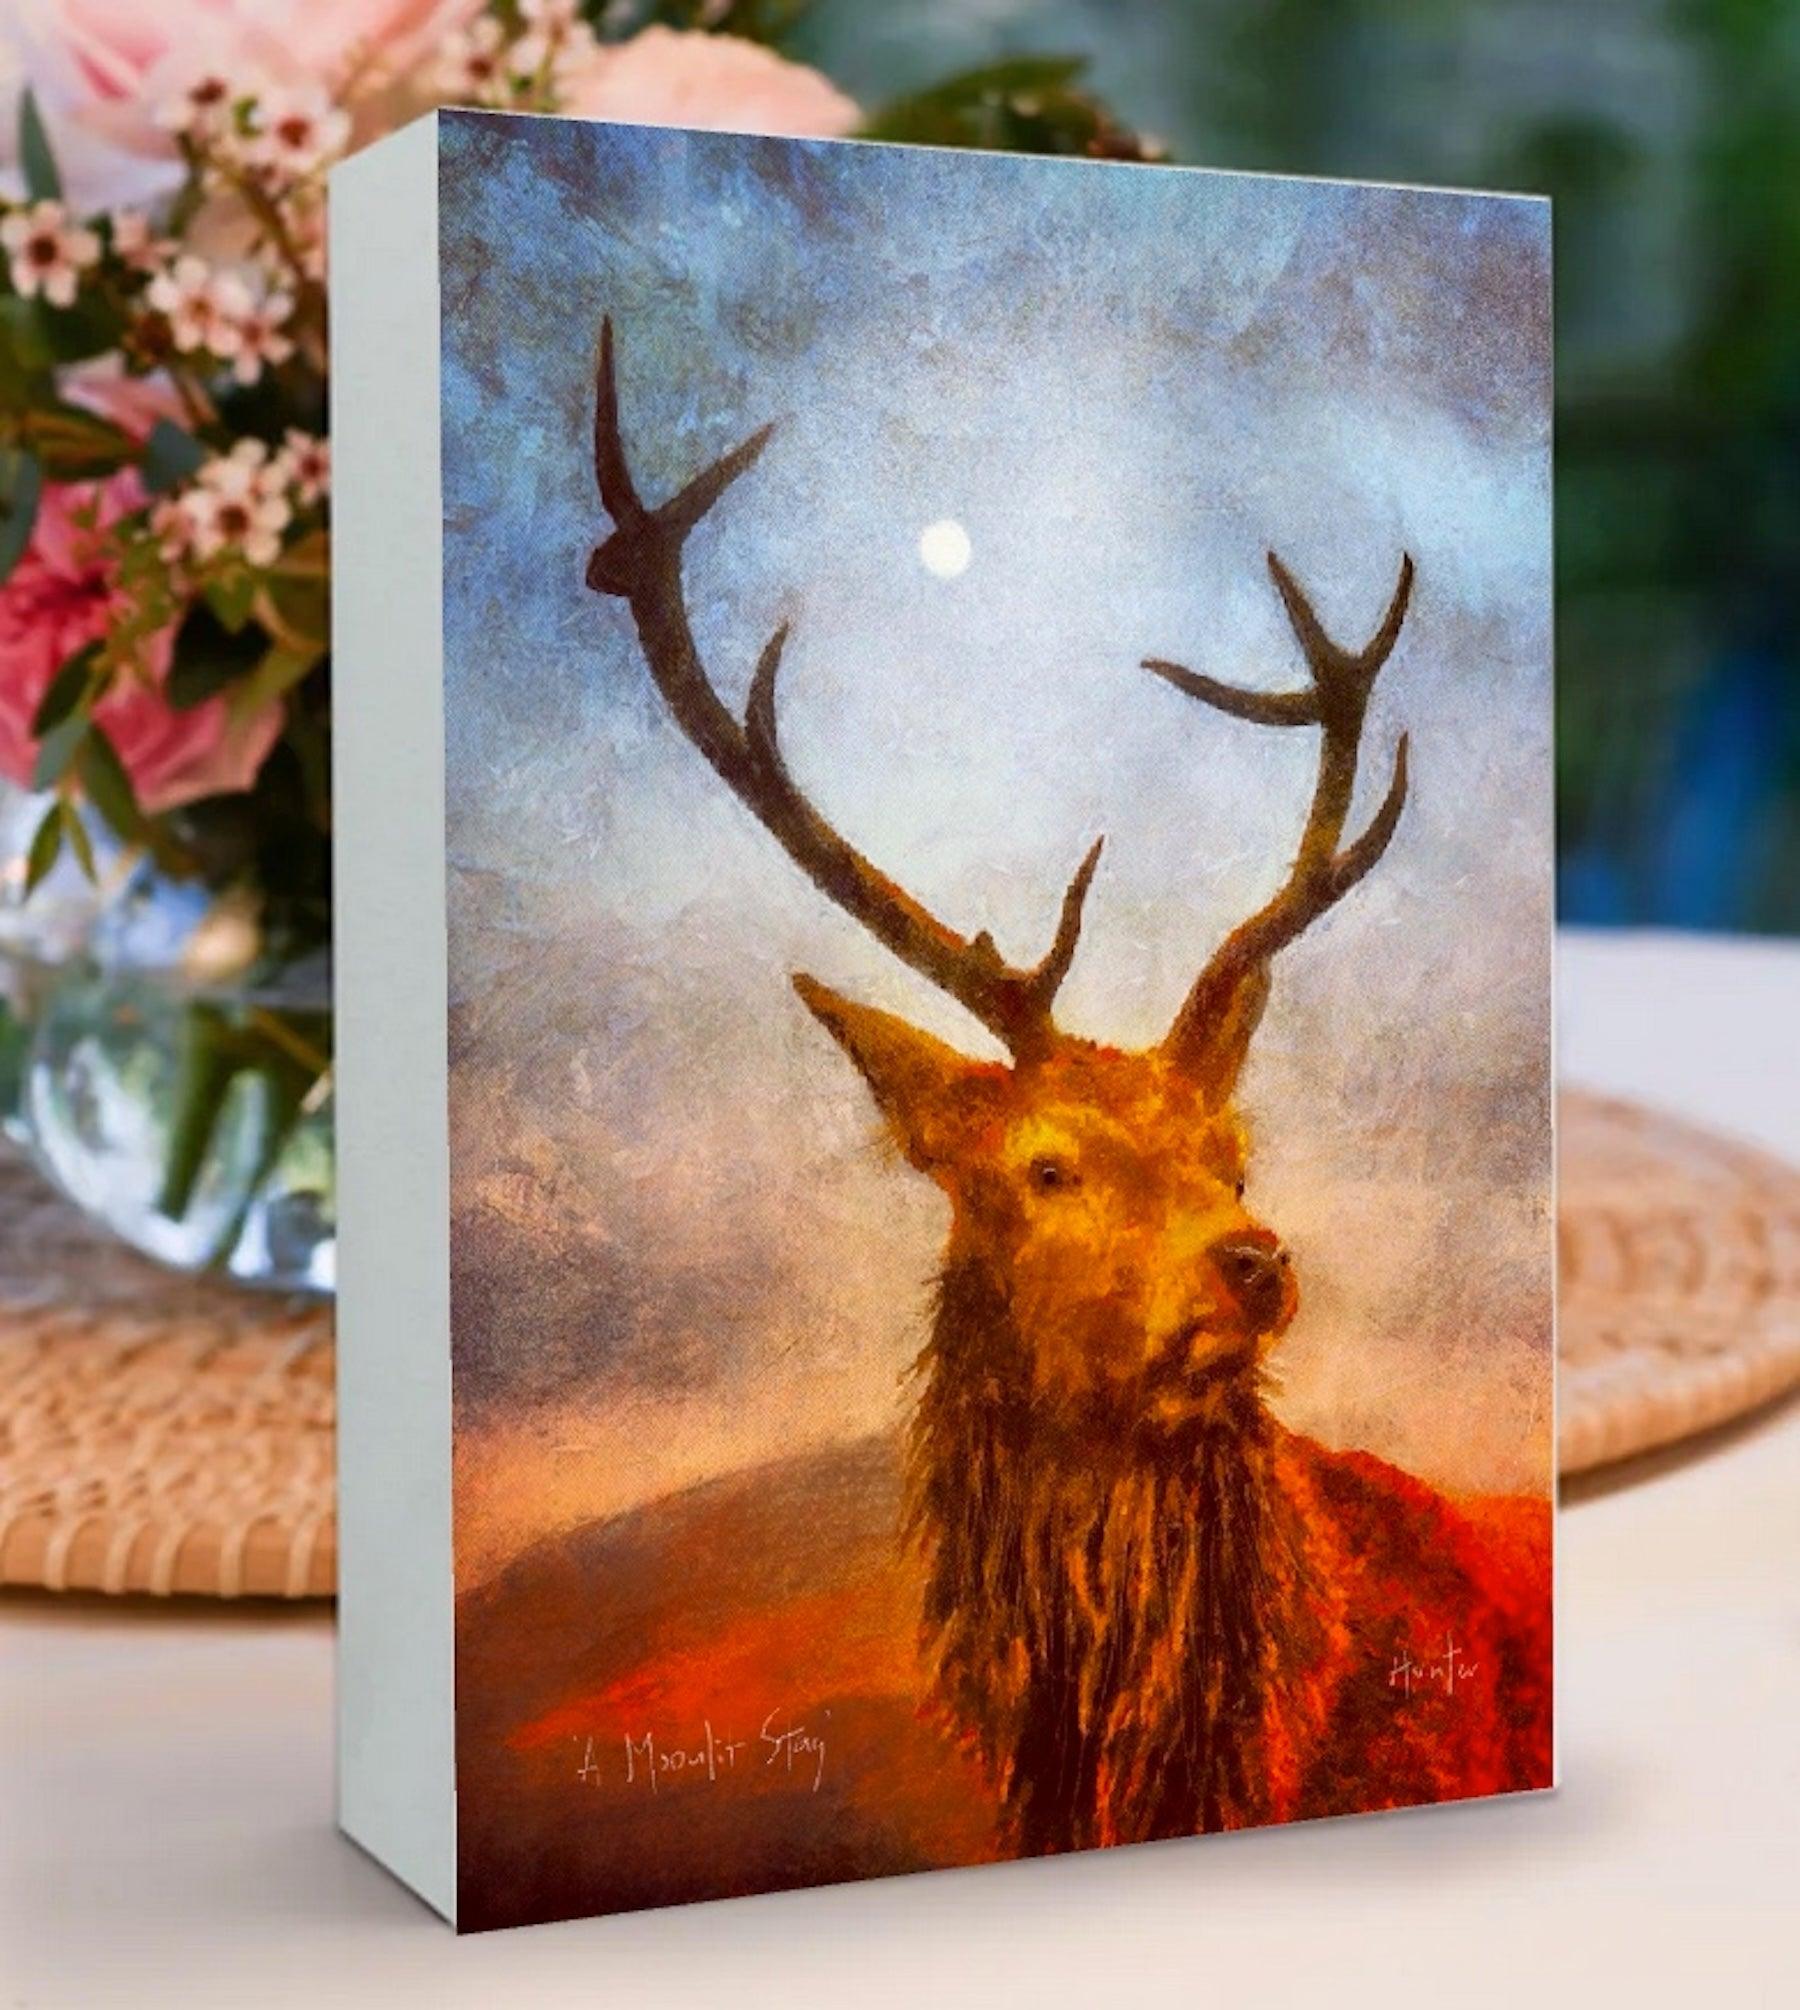 The Moonlit Highland Stag Wooden Art Block | Gifts Made In Scotland